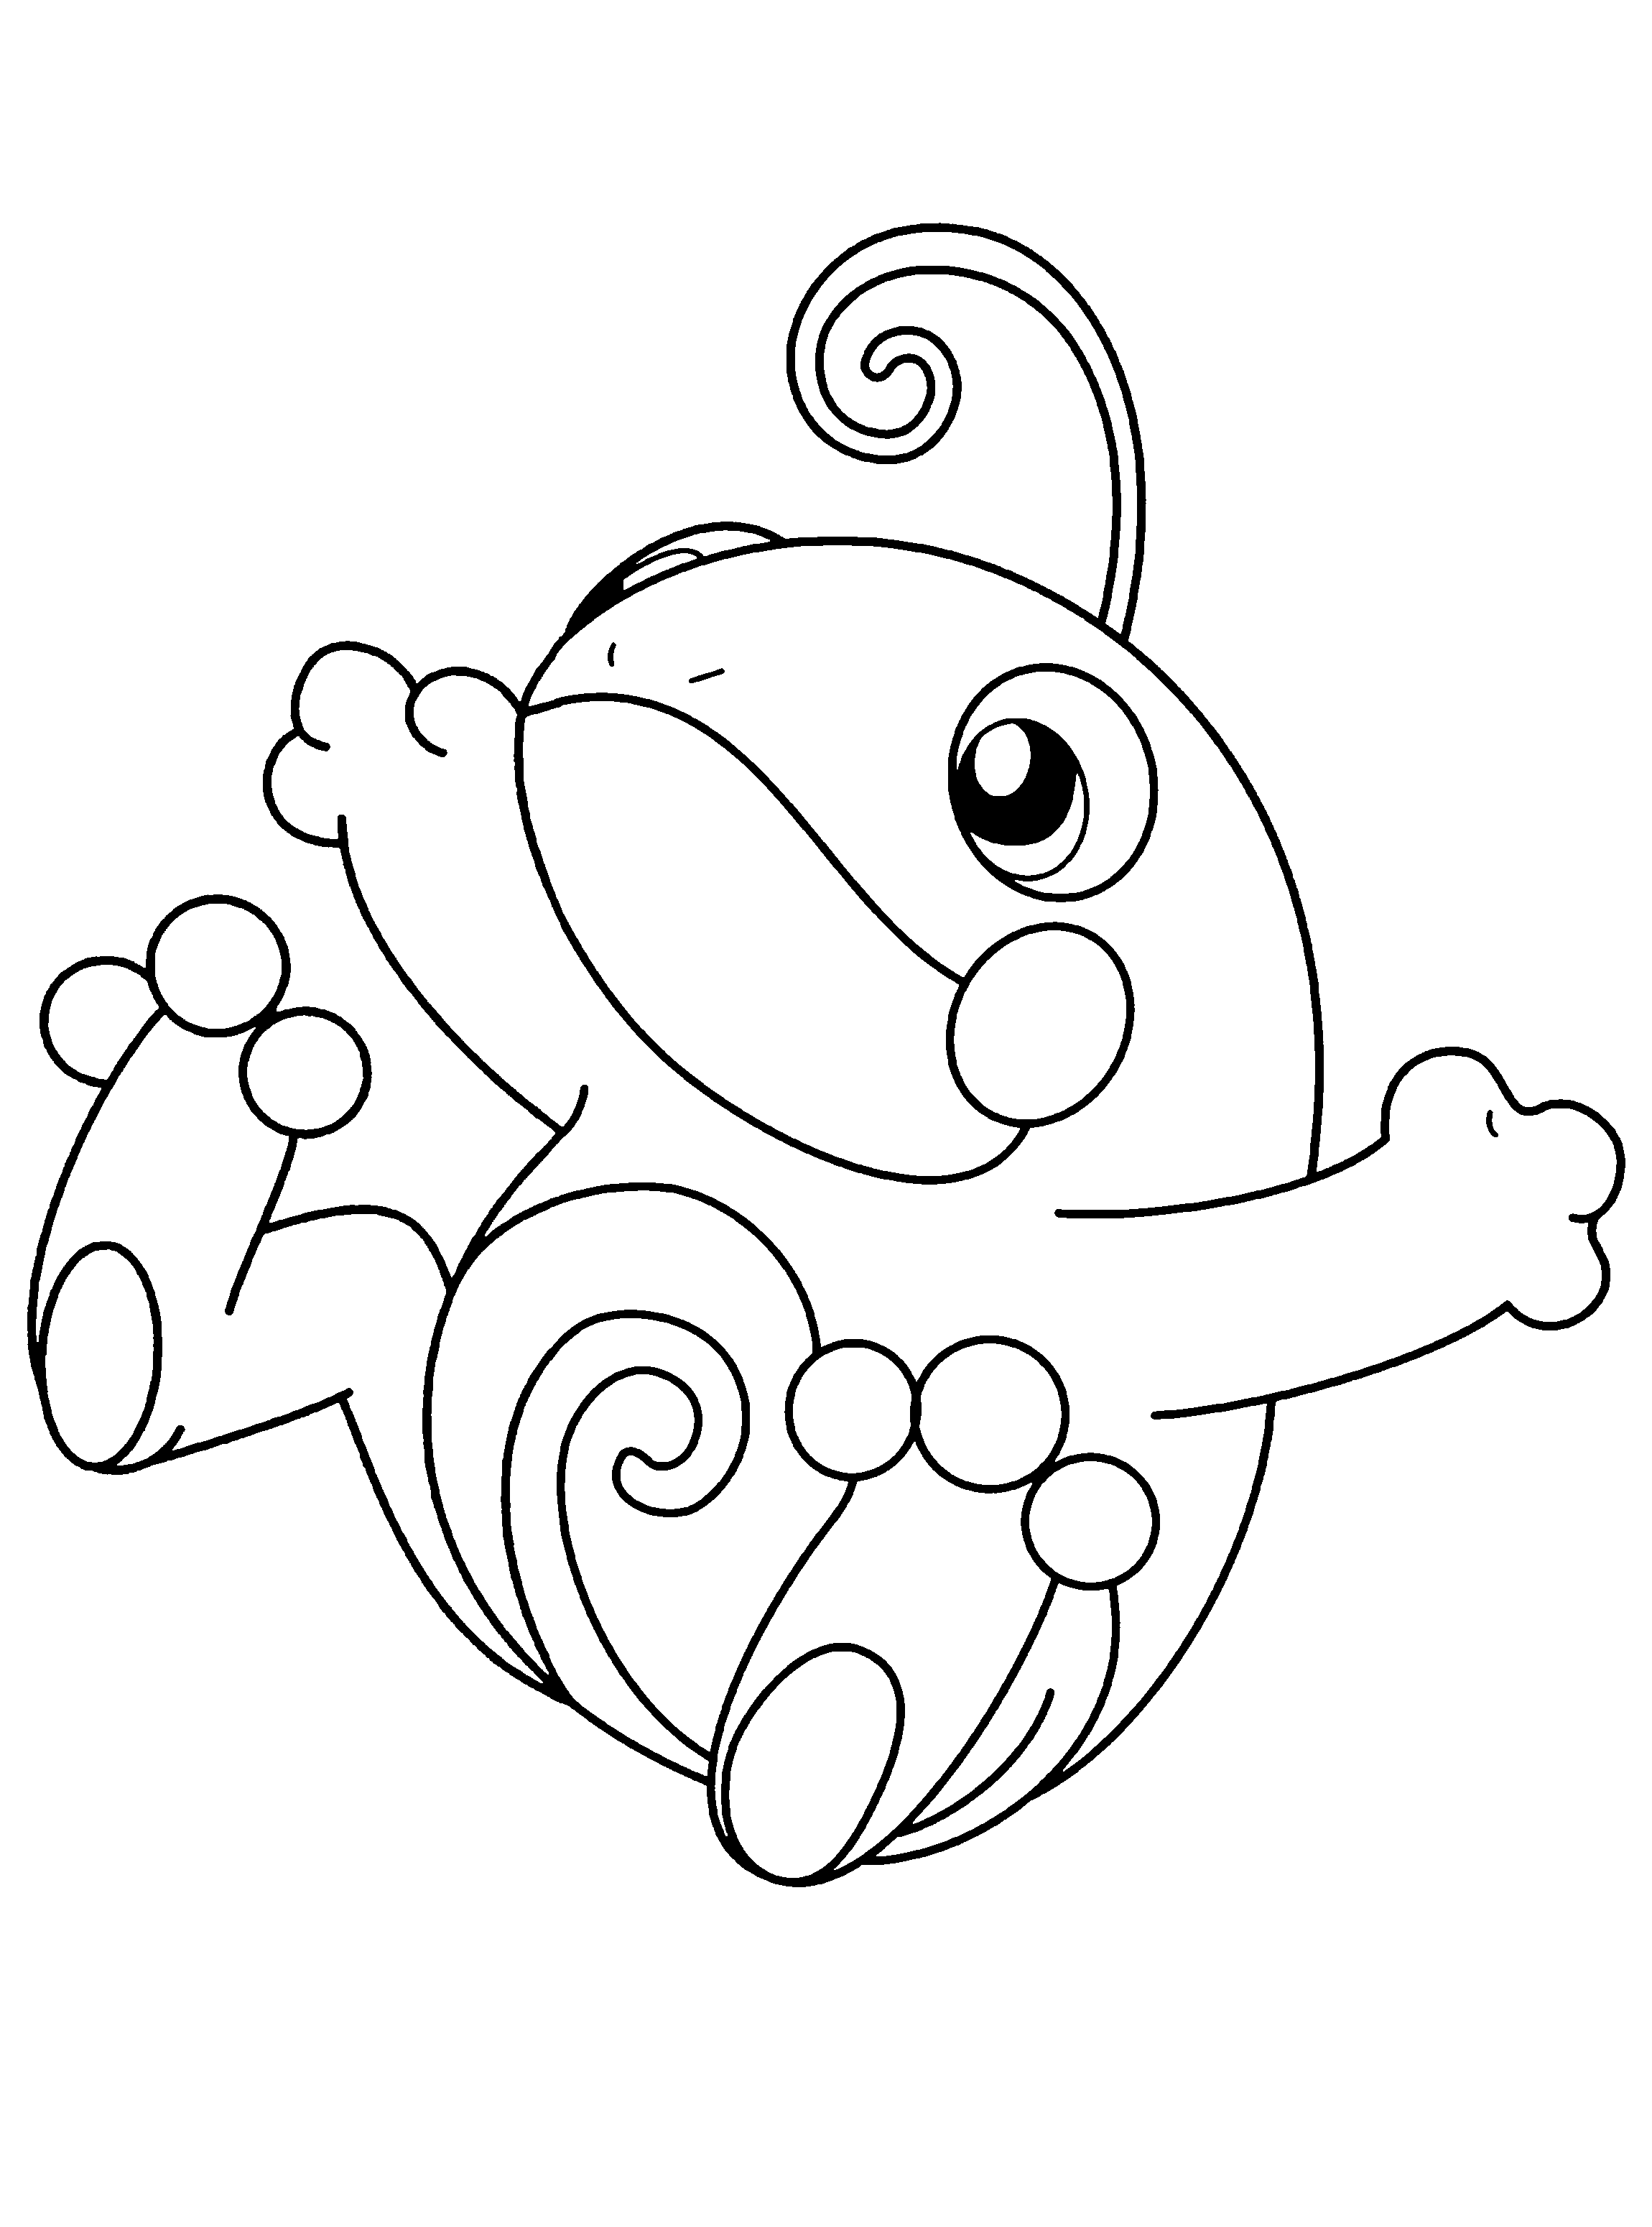 animated-coloring-pages-pokemon-image-0092